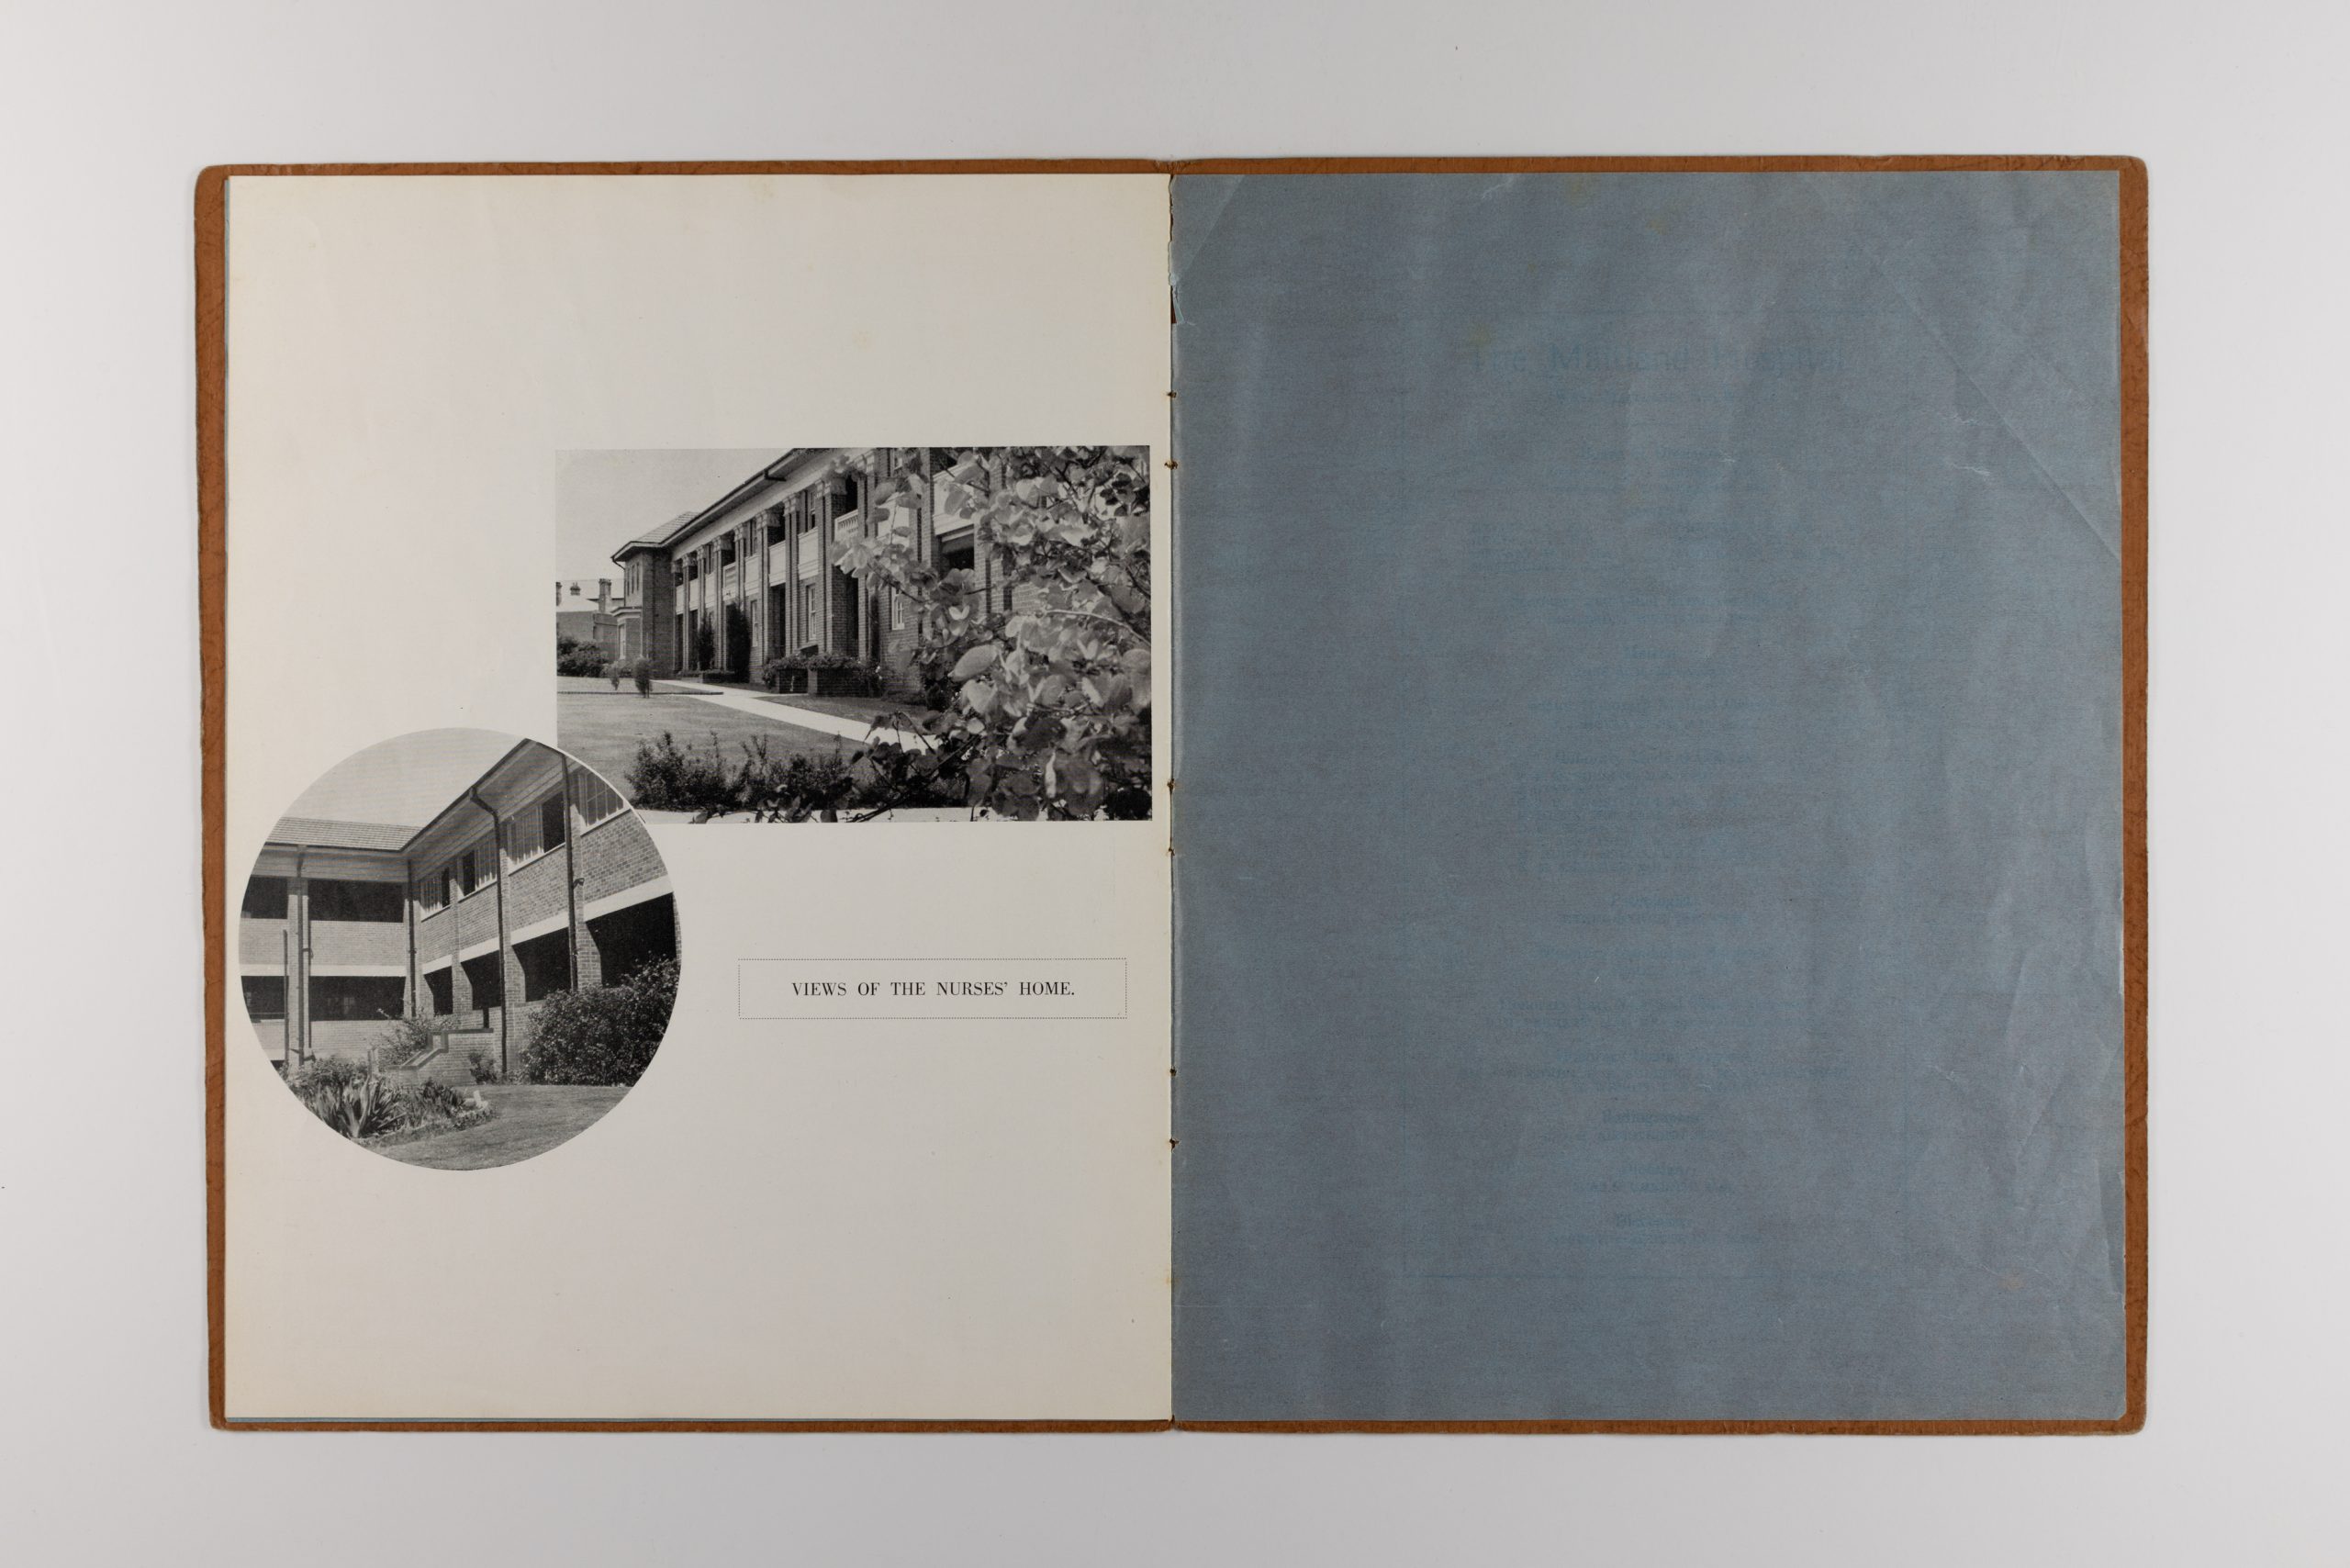 open pages of booklet, the left page has photos of the nurses' home, the right page is a semi-transparent blue page